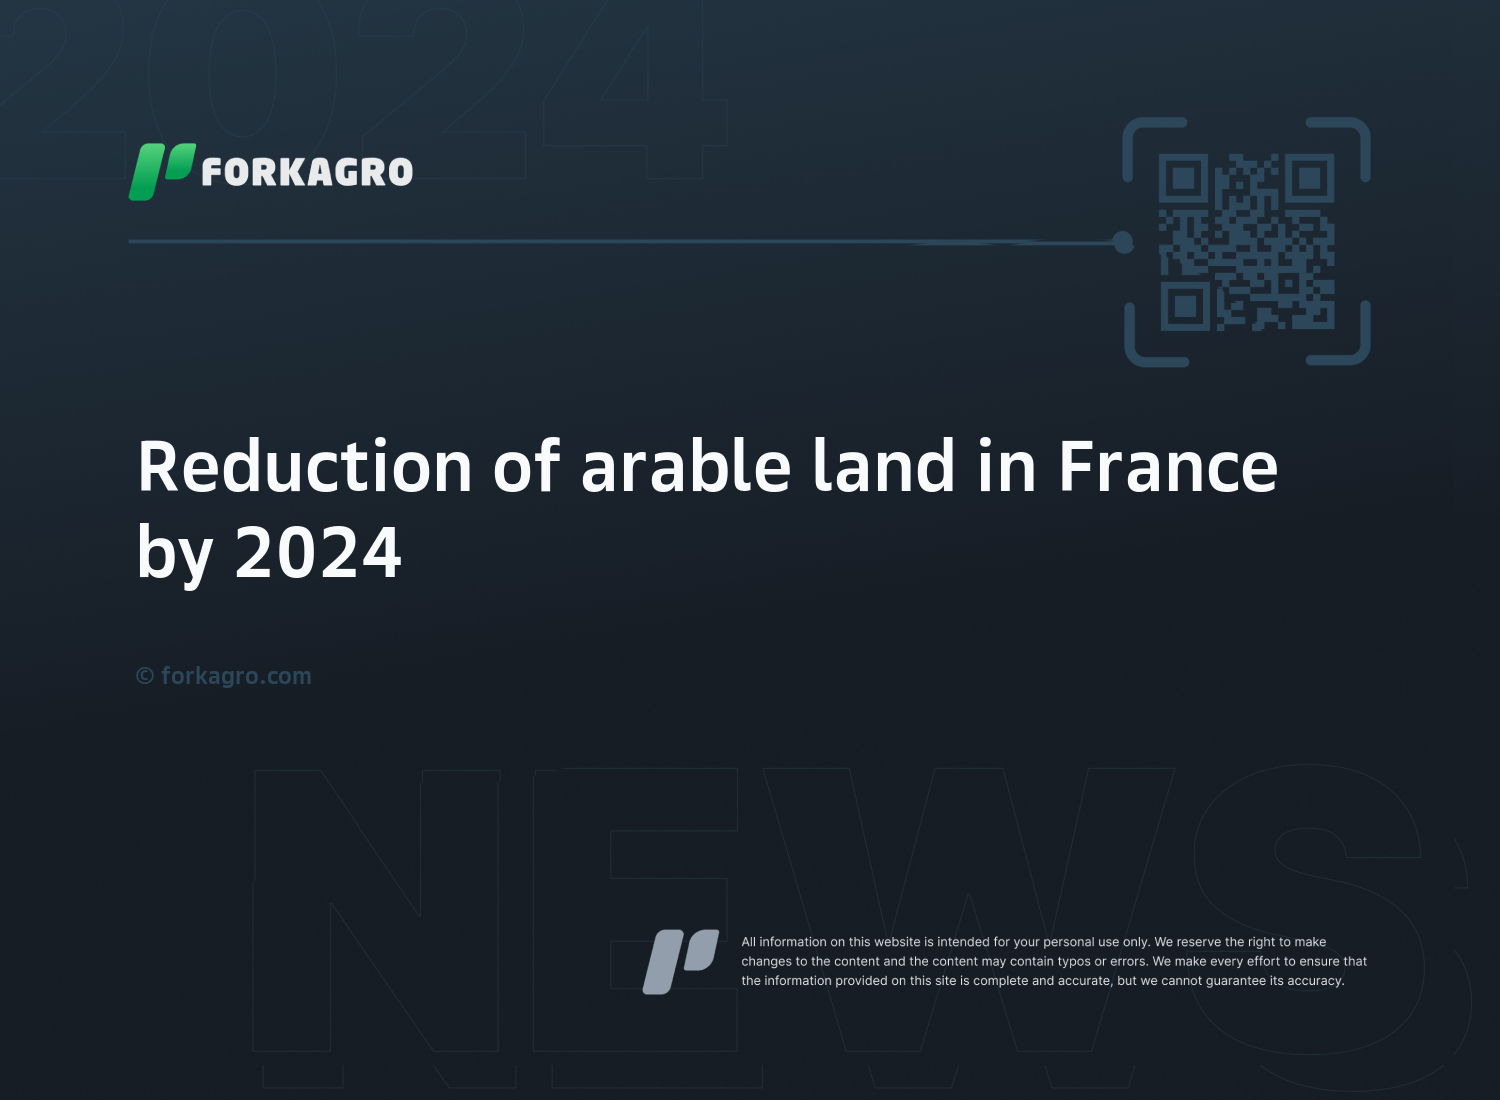 Reduction of arable land in France by 2024